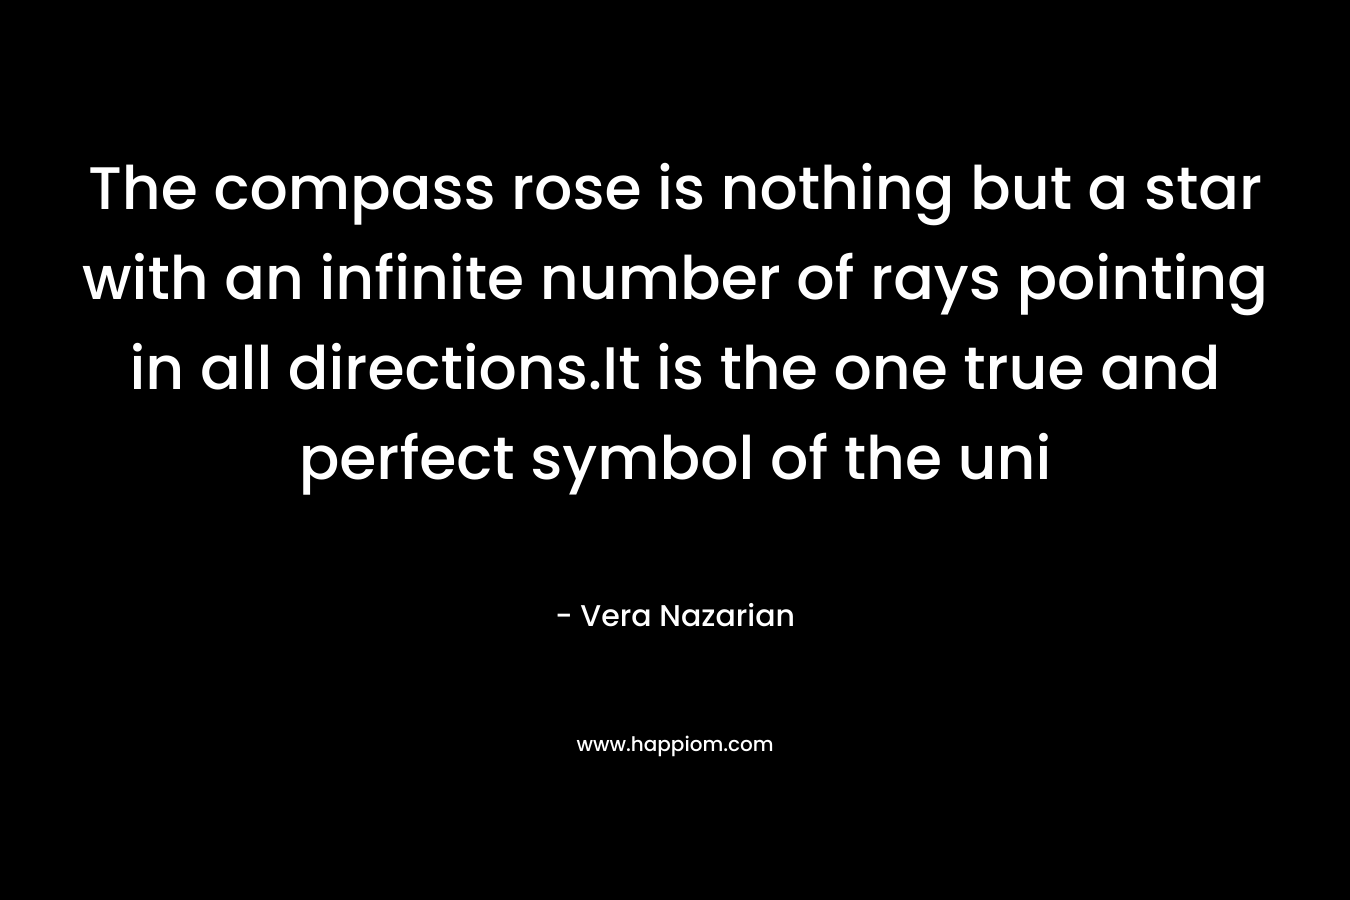 The compass rose is nothing but a star with an infinite number of rays pointing in all directions.It is the one true and perfect symbol of the uni